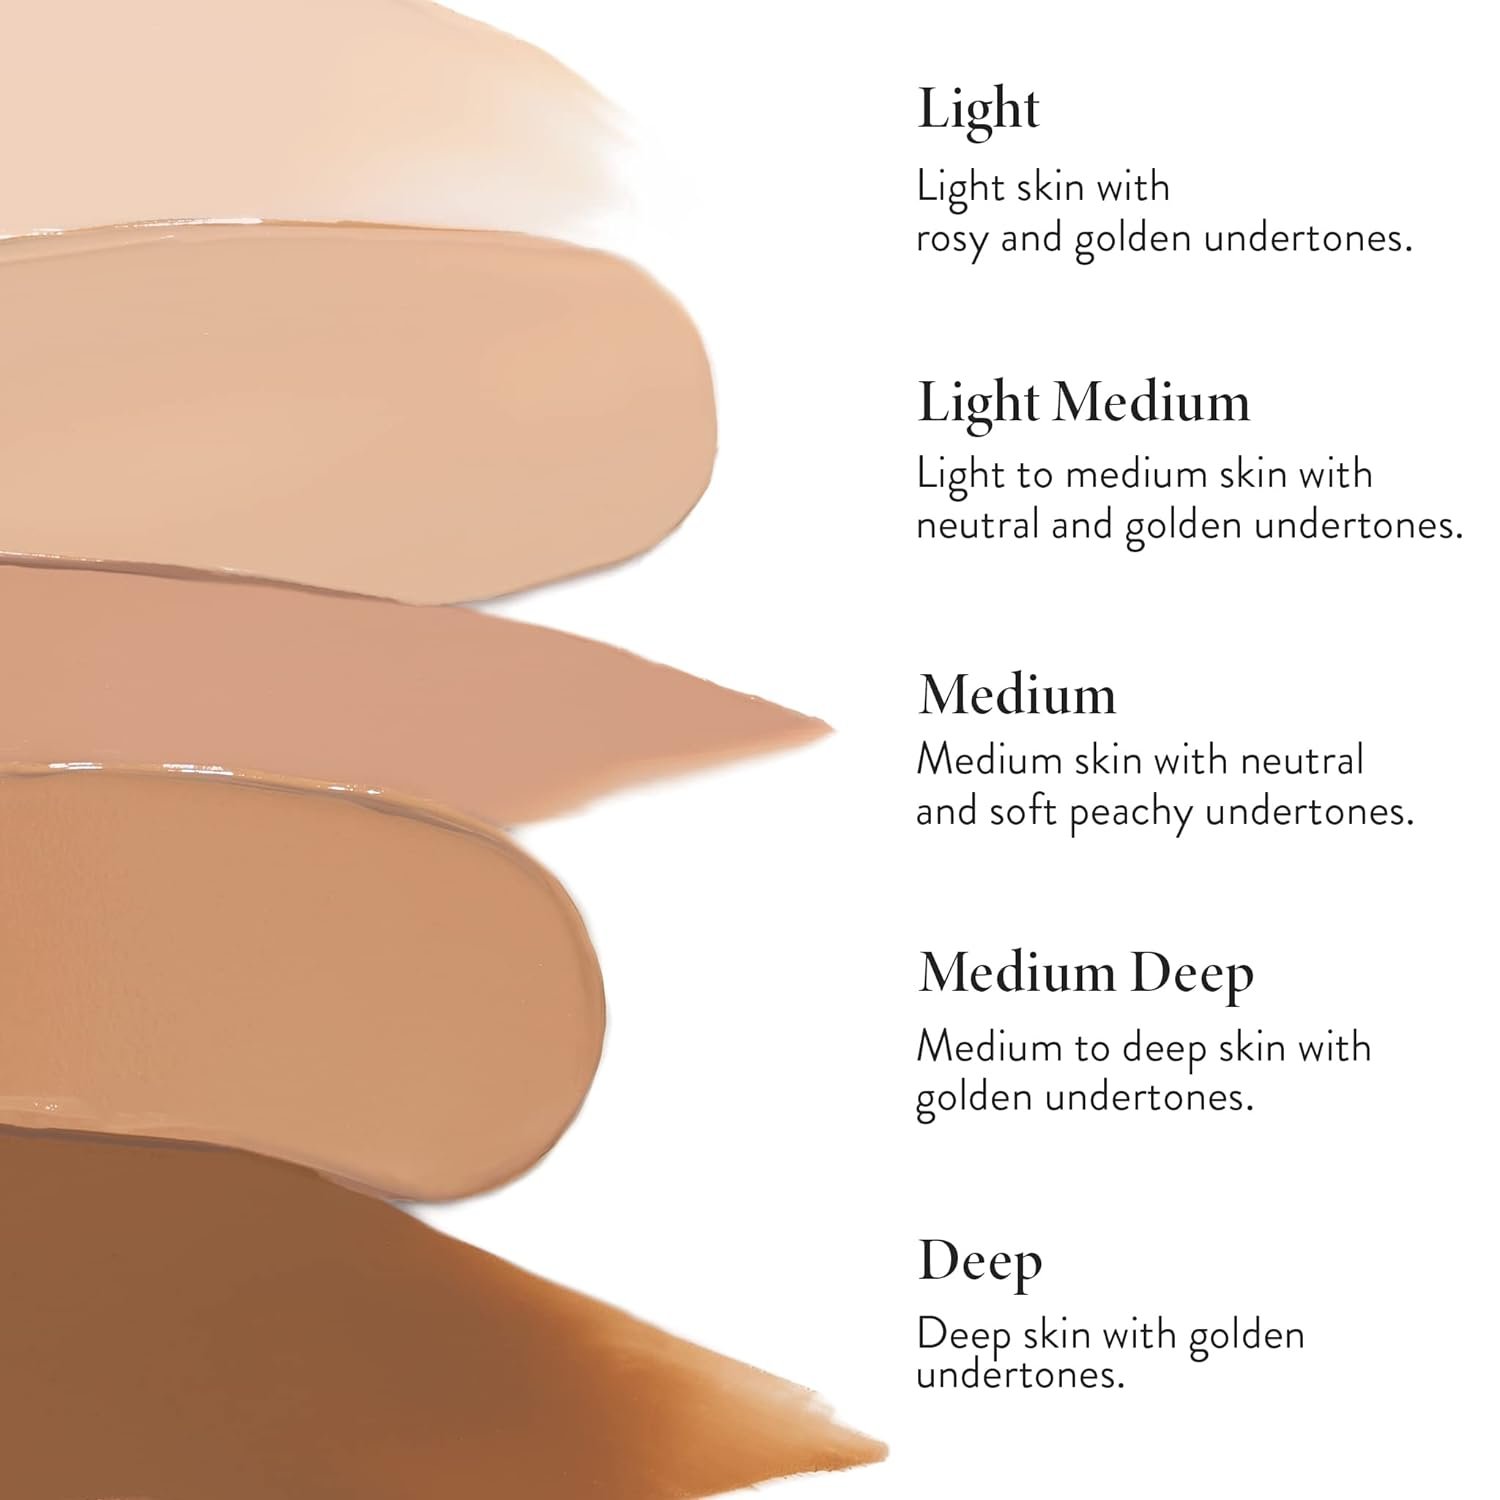 LAURA GELLER NEW YORK Quench-n-Tint Hydrating Foundation - Light - Sheer to Light Buildable Coverage - Natural Glow Finish - Lightweight Formula with Hyaluronic Acid